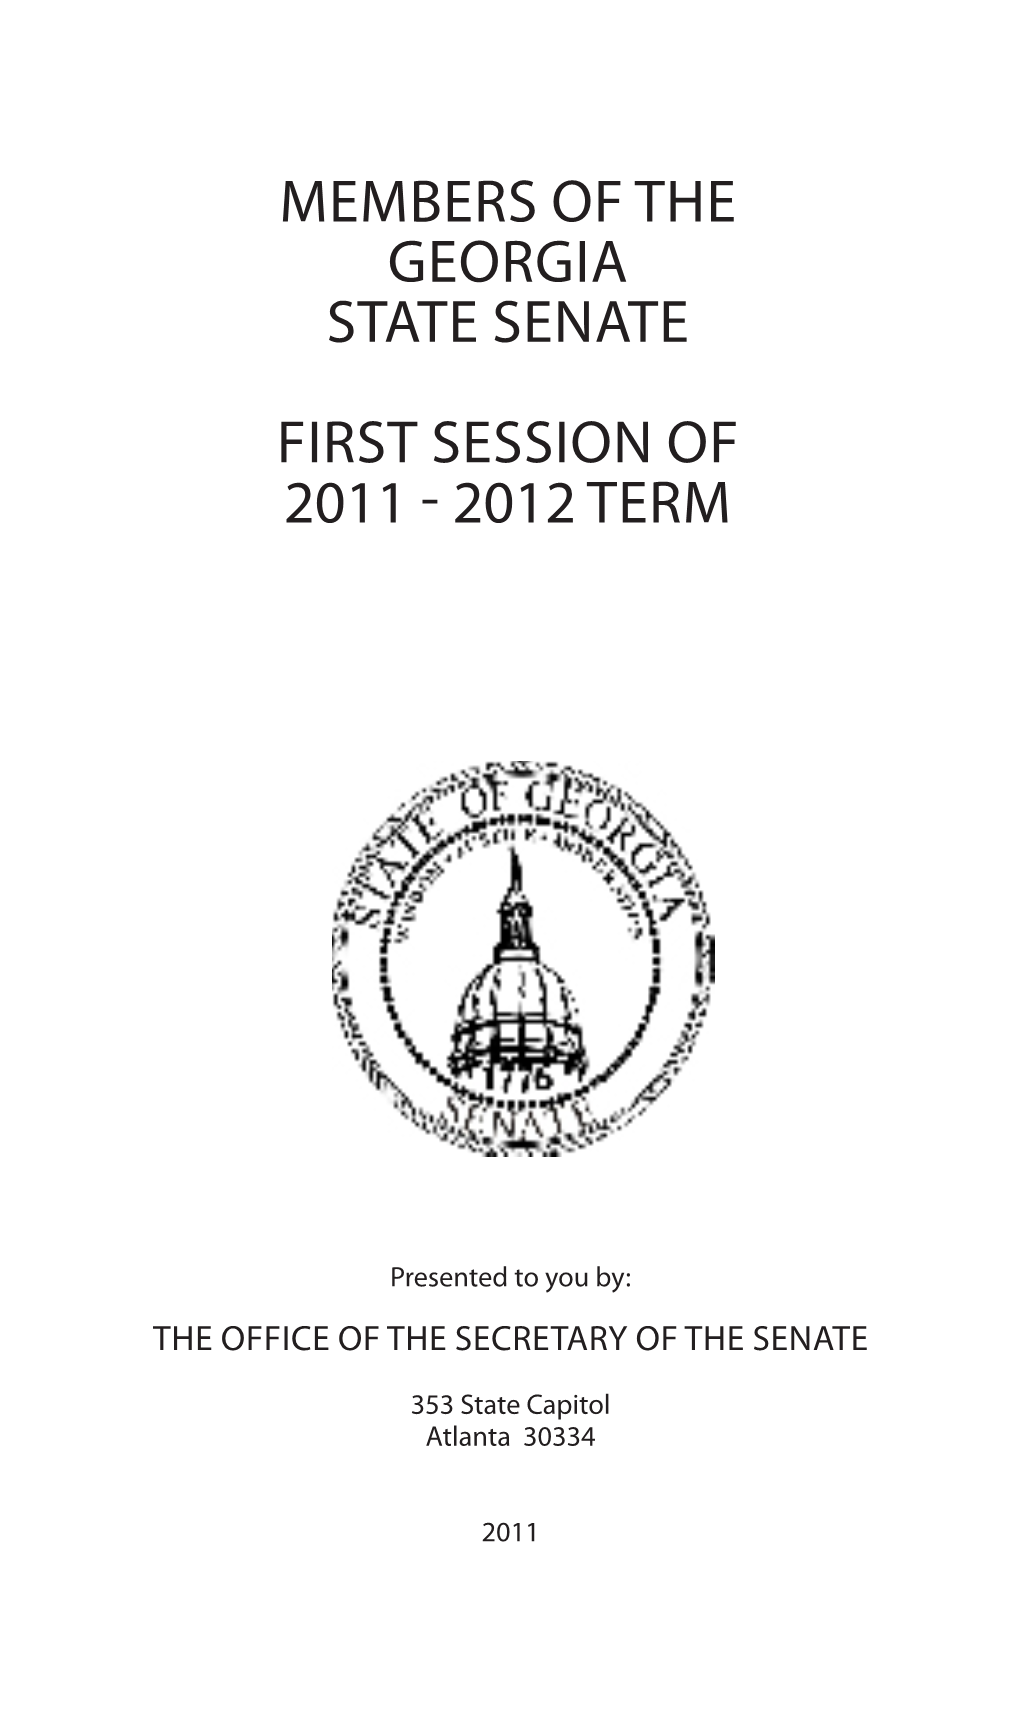 Members of the Georgia State Senate First Session of 2011 - 2012 Term